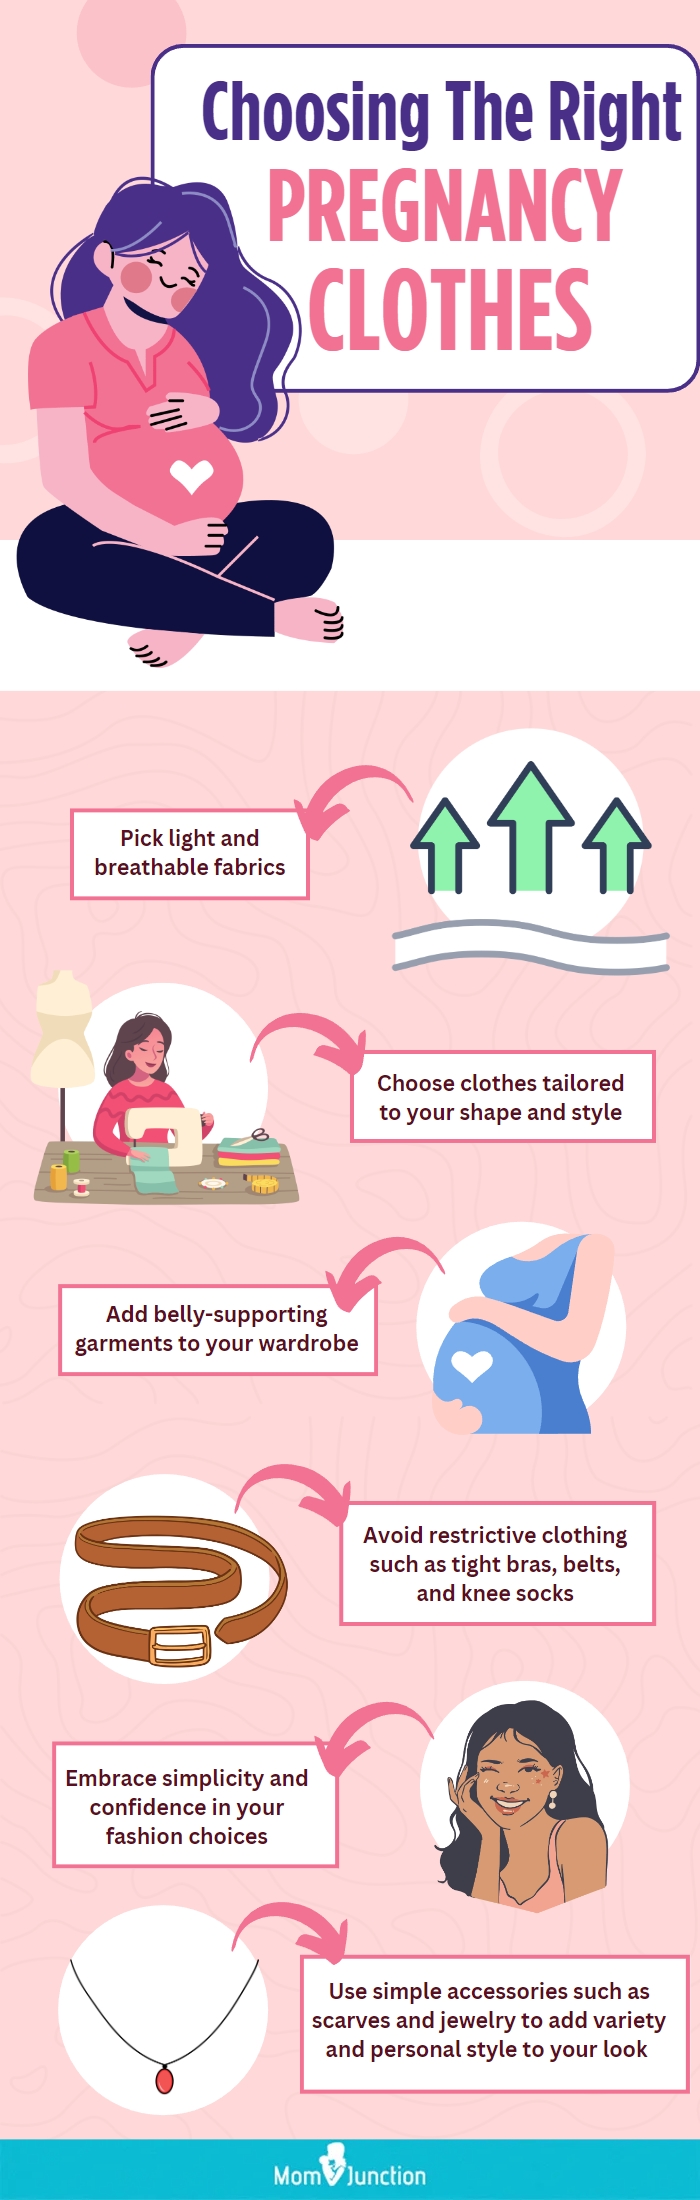 choosing the right pregnancy clothes (infographic)